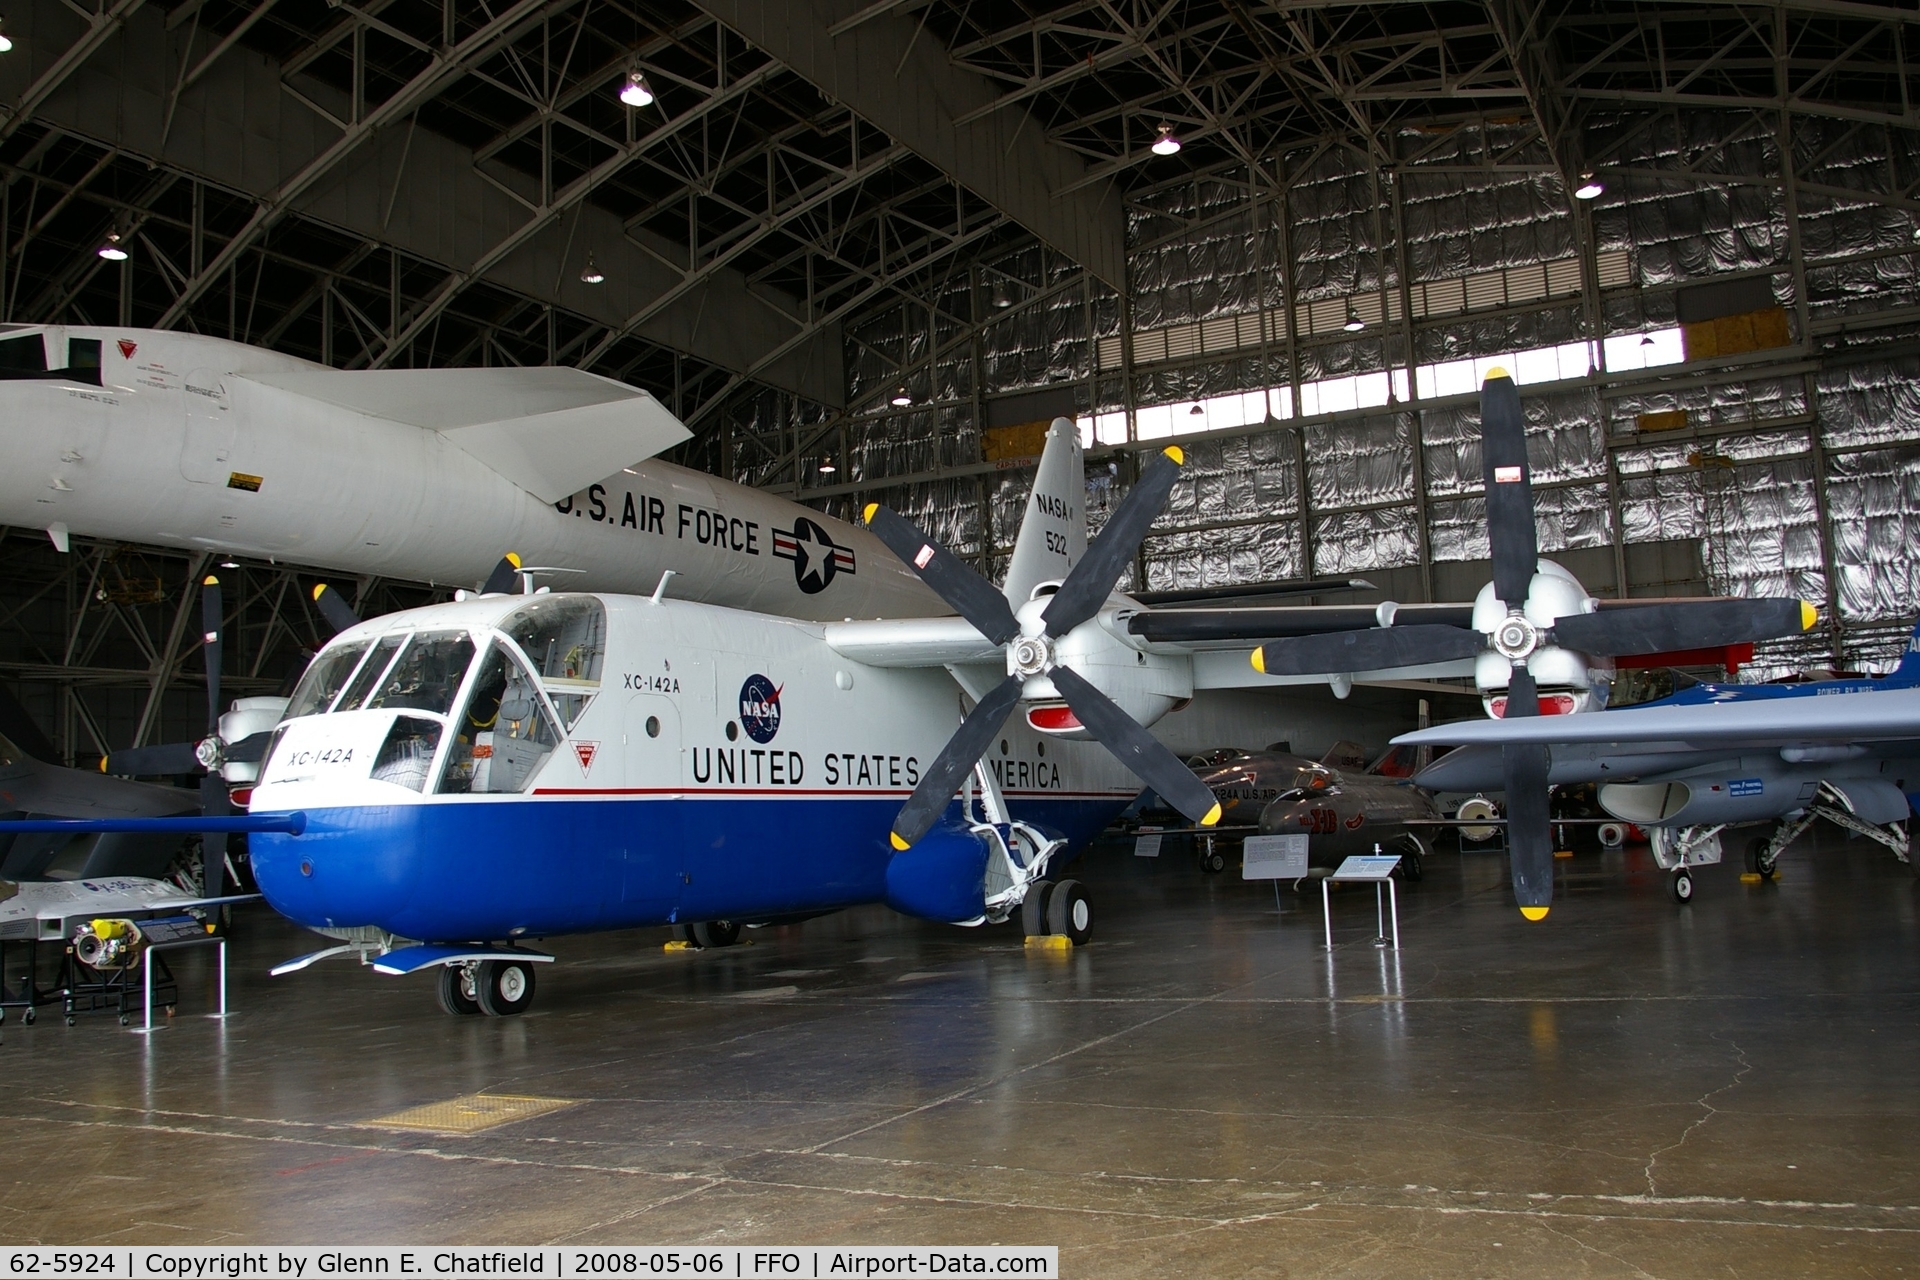 62-5924, 1964 LTV/Hiller/Ryan XC-142A C/N 4, Tilt-wing at the National Museum of the U.S. Air Force